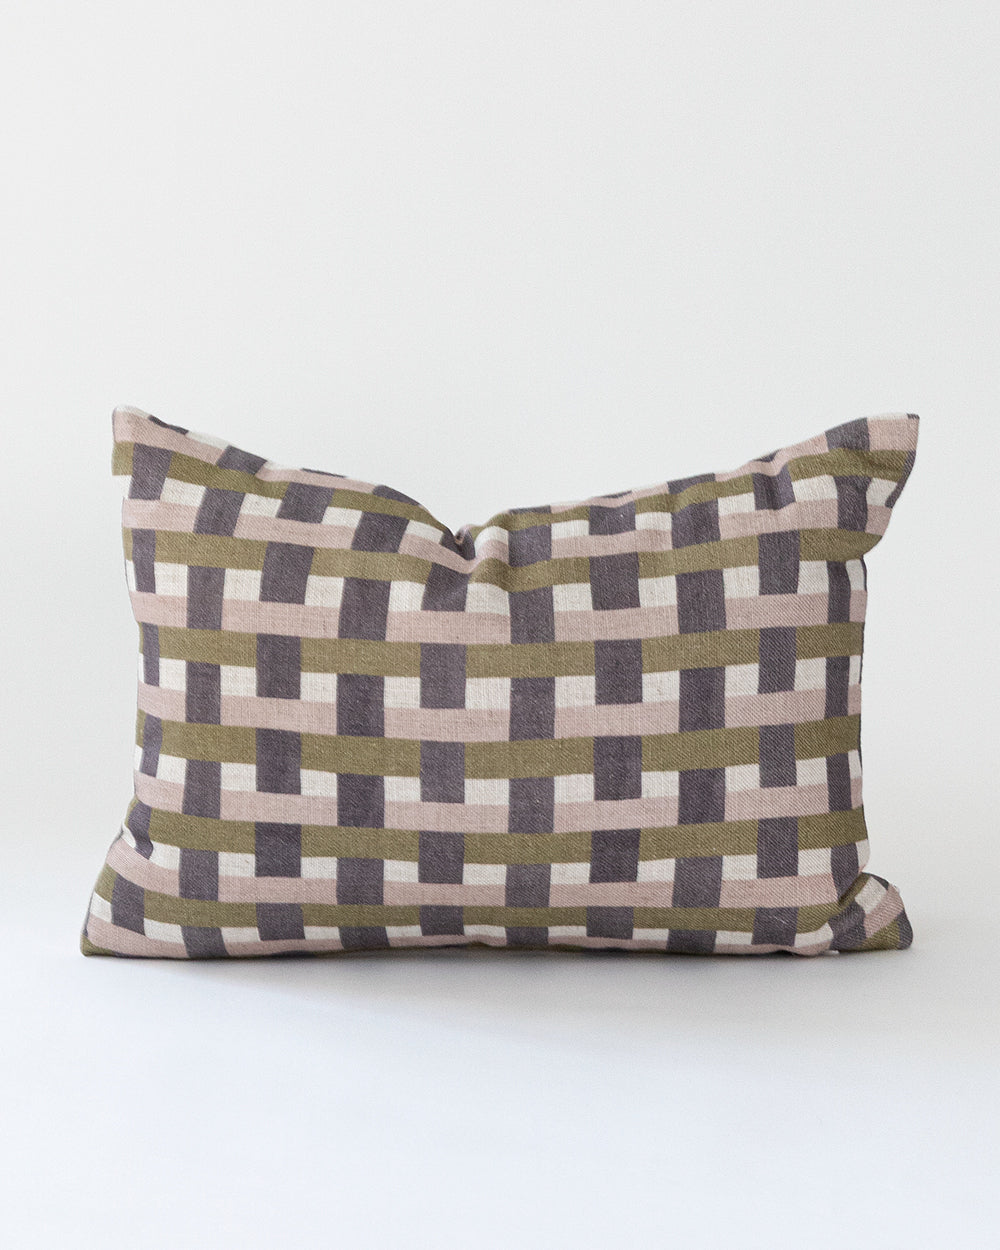 Plum, mauve and olive green check printed rectangle pillow